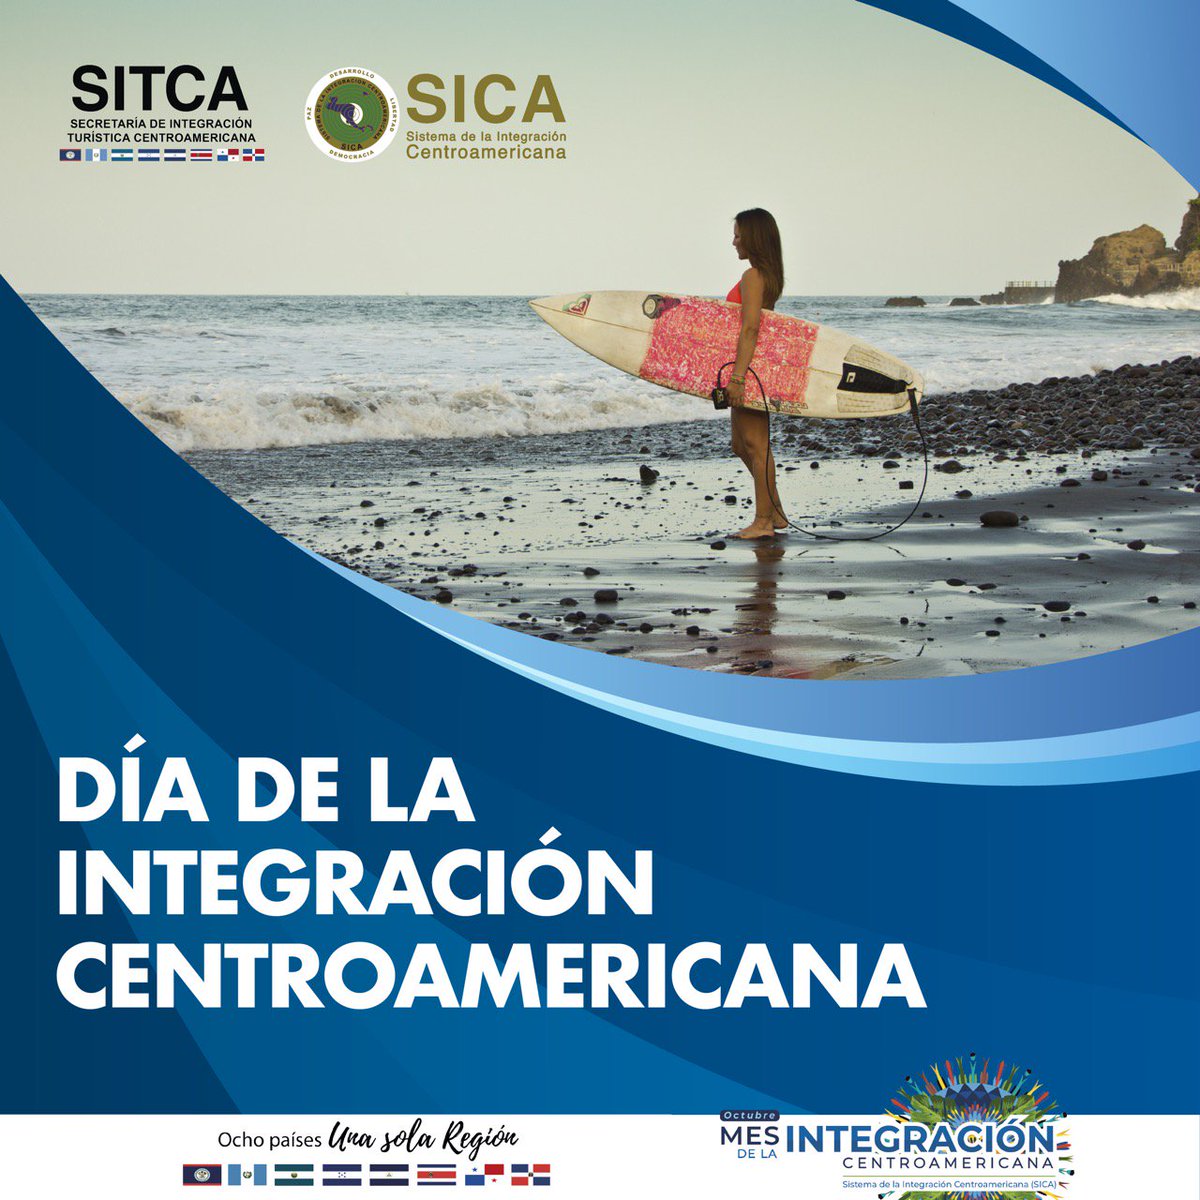 #Nicaragua is at forefront supporting @sitca_turismo 🇳🇮🇧🇿🇨🇷🇩🇴🇸🇻🇬🇹🇭🇳🇵🇦 excellent work for Month of Central American Integration & all year. Integration for sustainable development is hugely important for all our region. #VisitCentralAmerica #RegionDeOportunidades #NicaraguaIsOpen